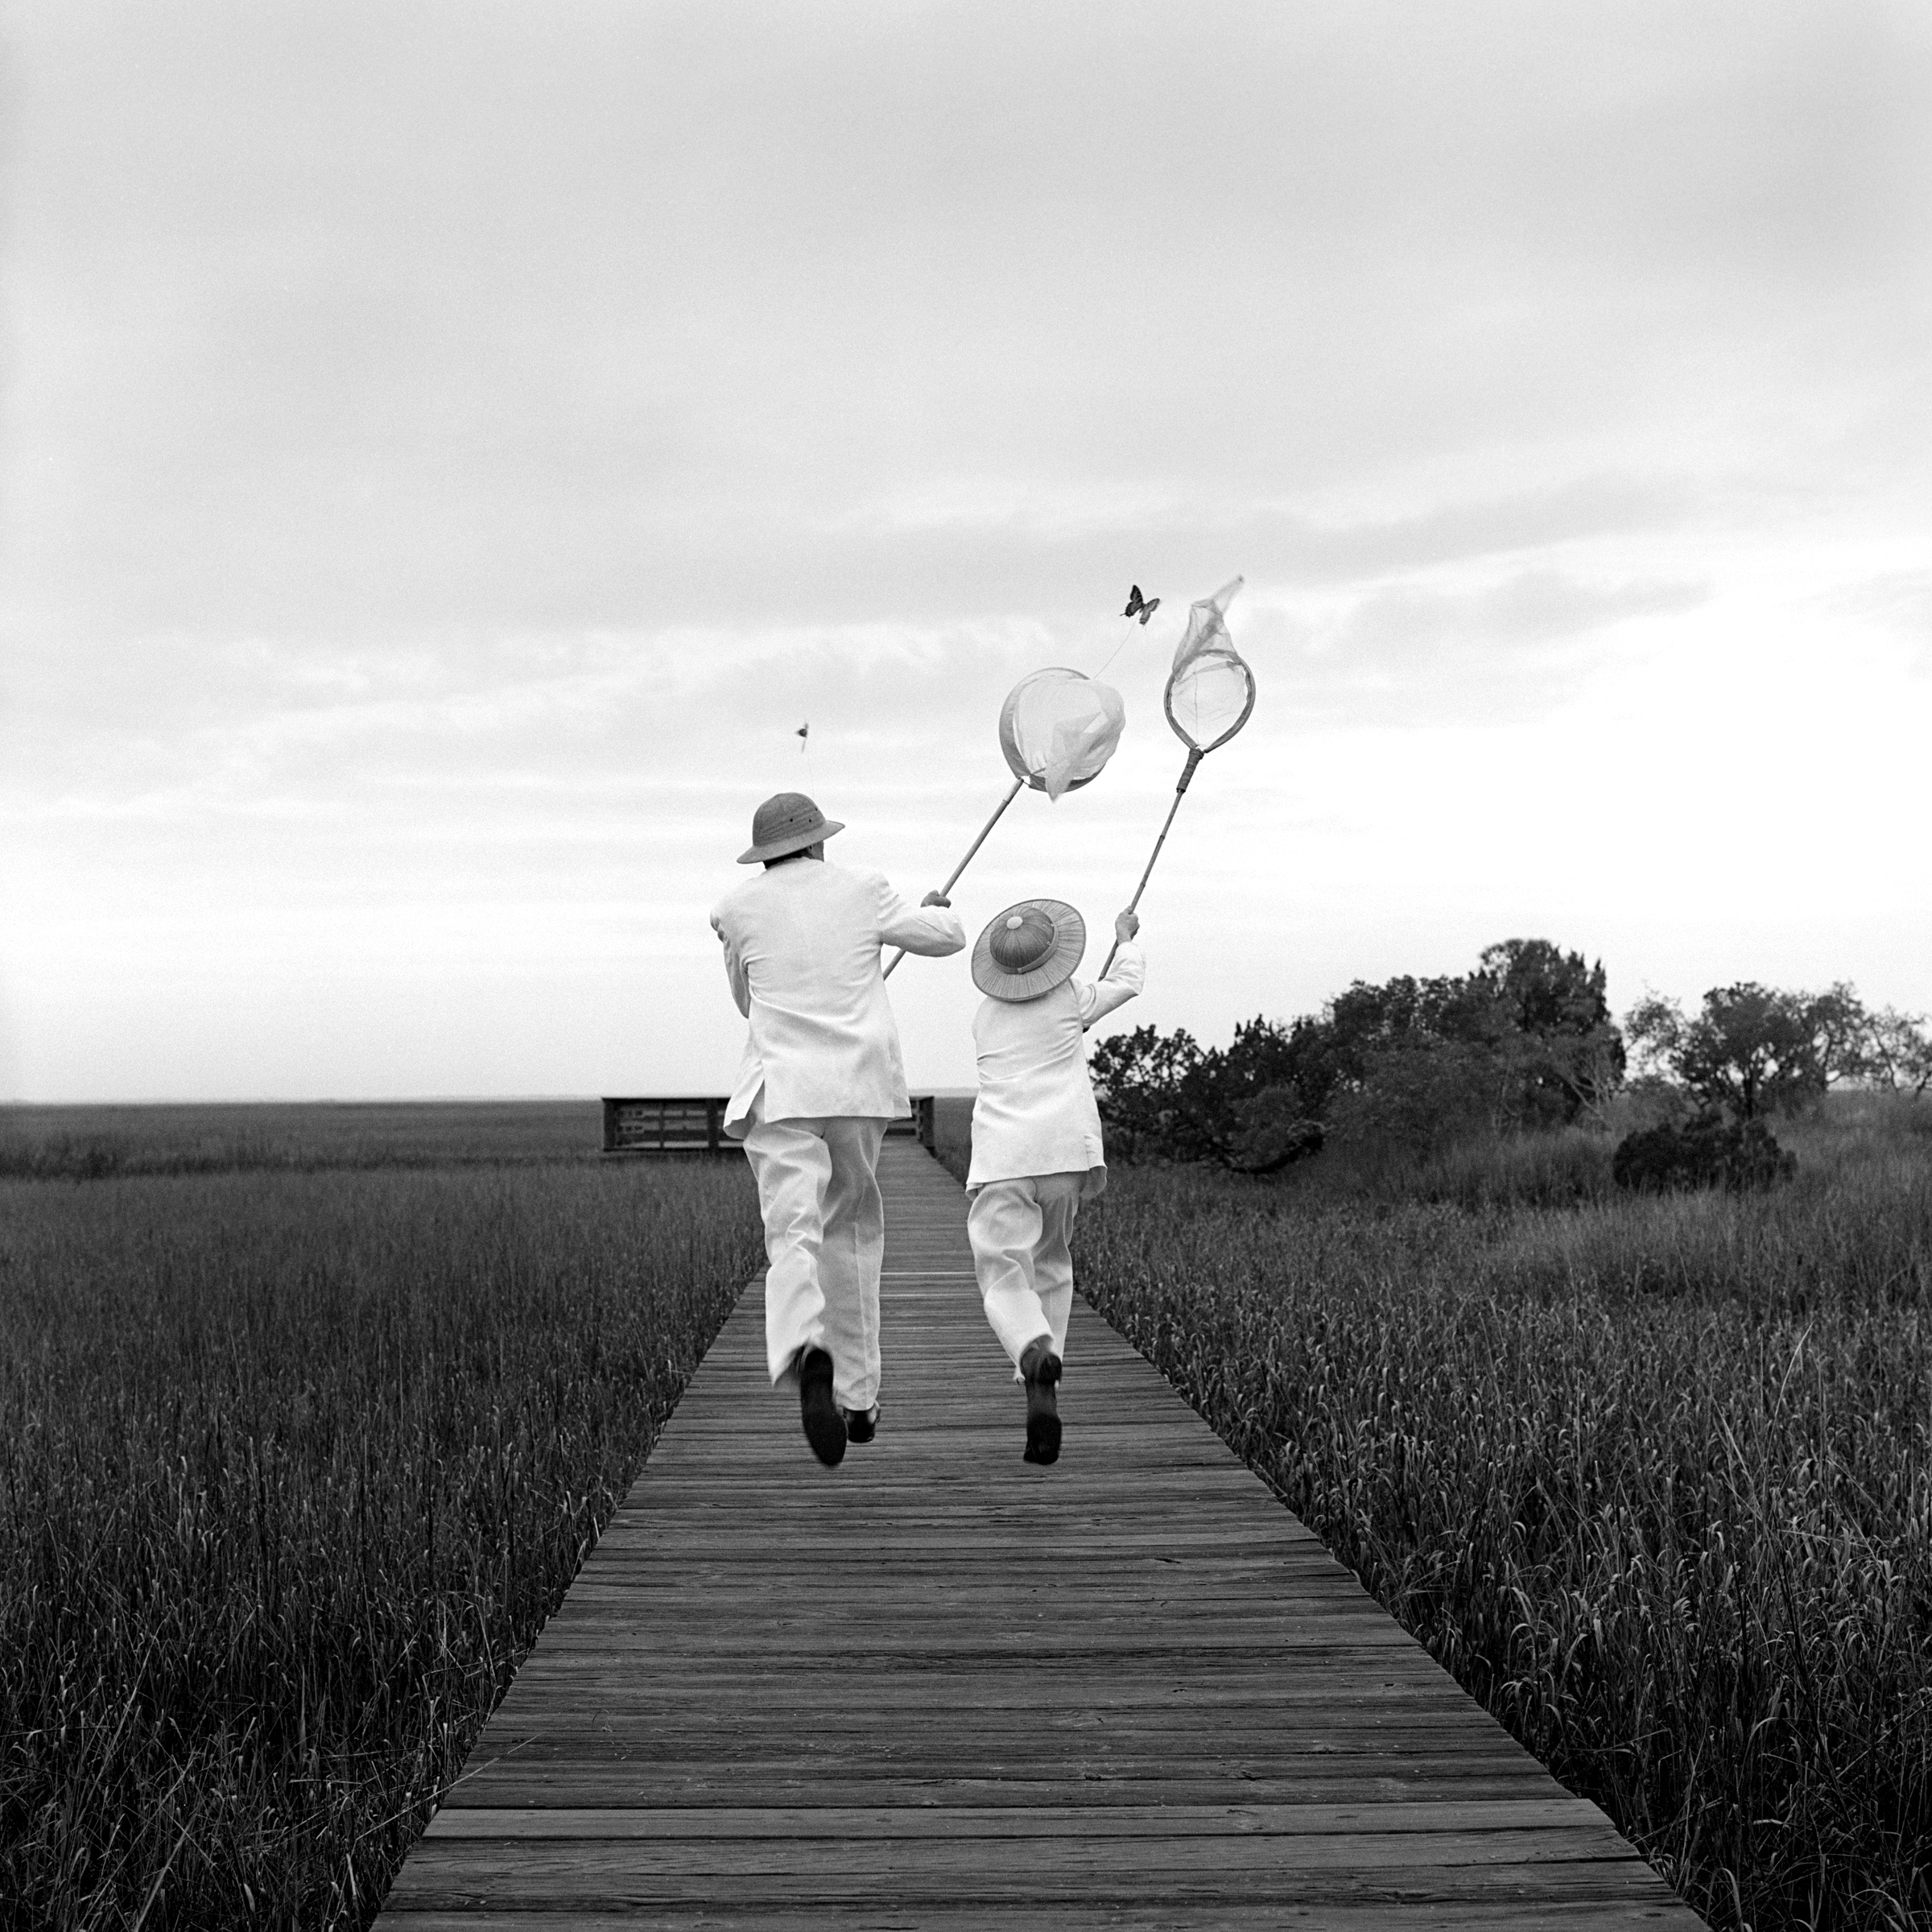   Gary and Henry Chasing Butterfly,&nbsp;Beaufort, SC  1996 Silver gelatin print 27 x 27 cm (image) 56 x 66 cm (mount) 